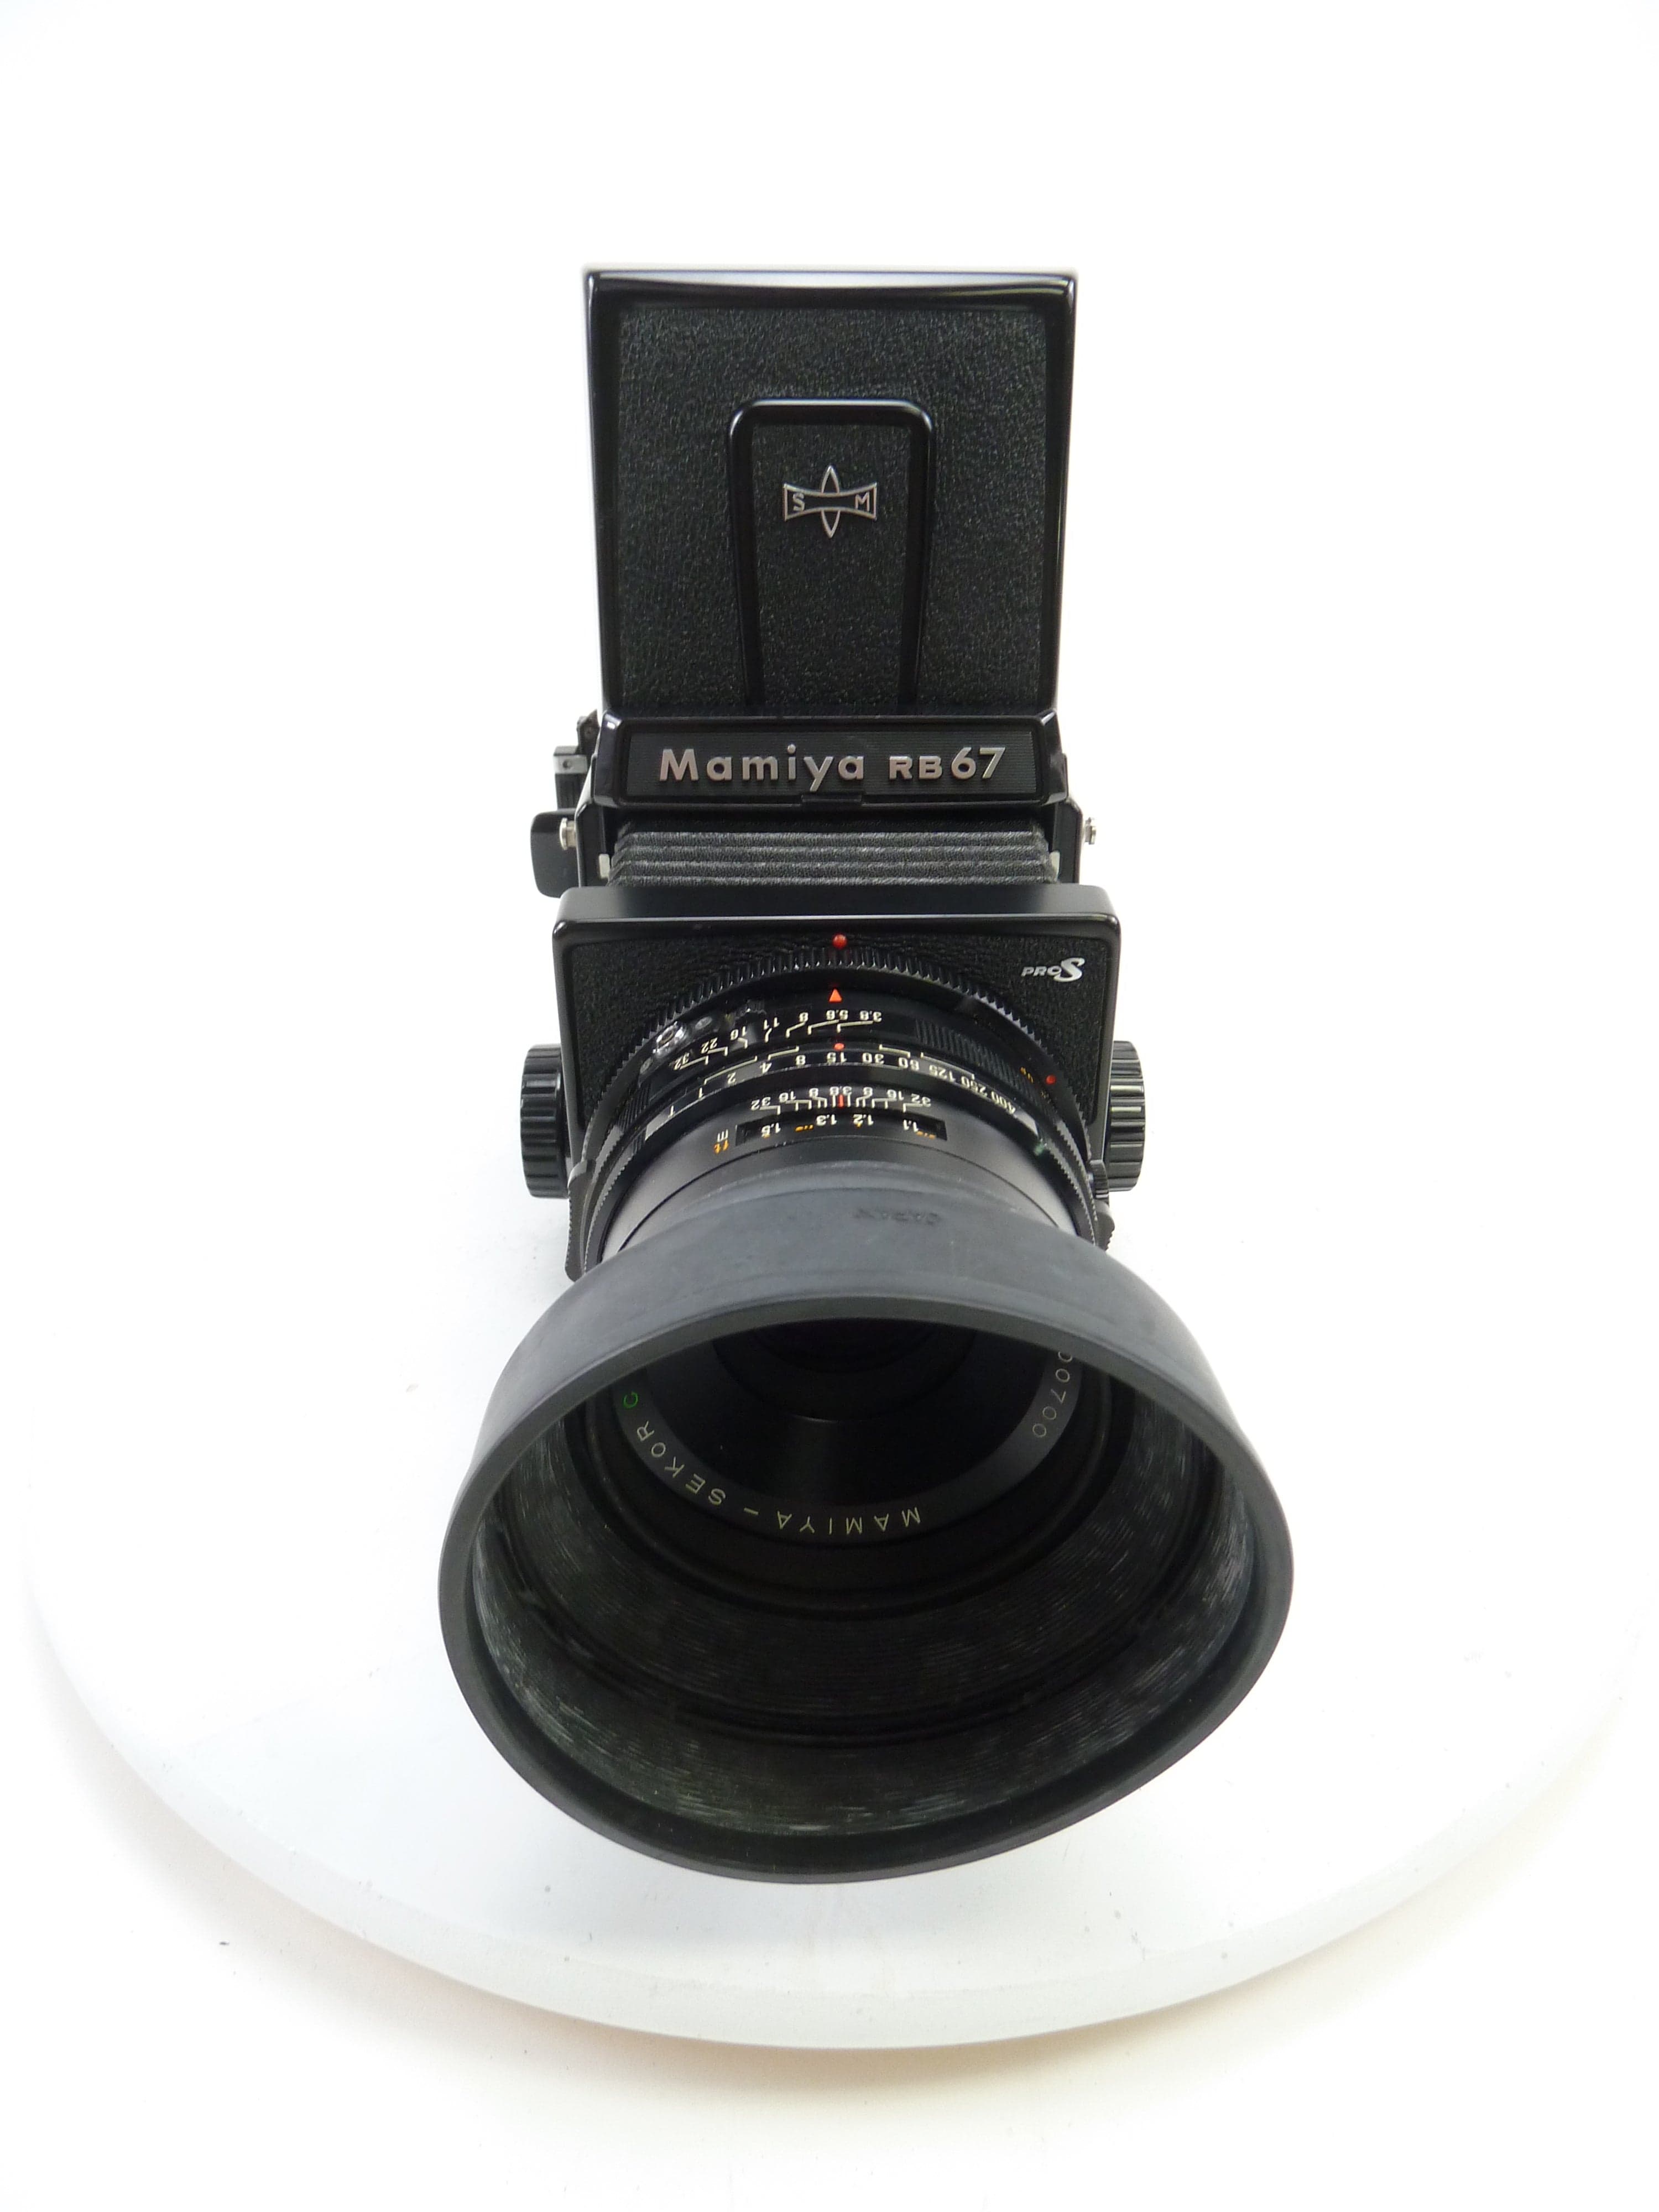 Mamiya RB67 Pro S Outfit with 127MM f3.8 C Lens, Pro S 120 Back